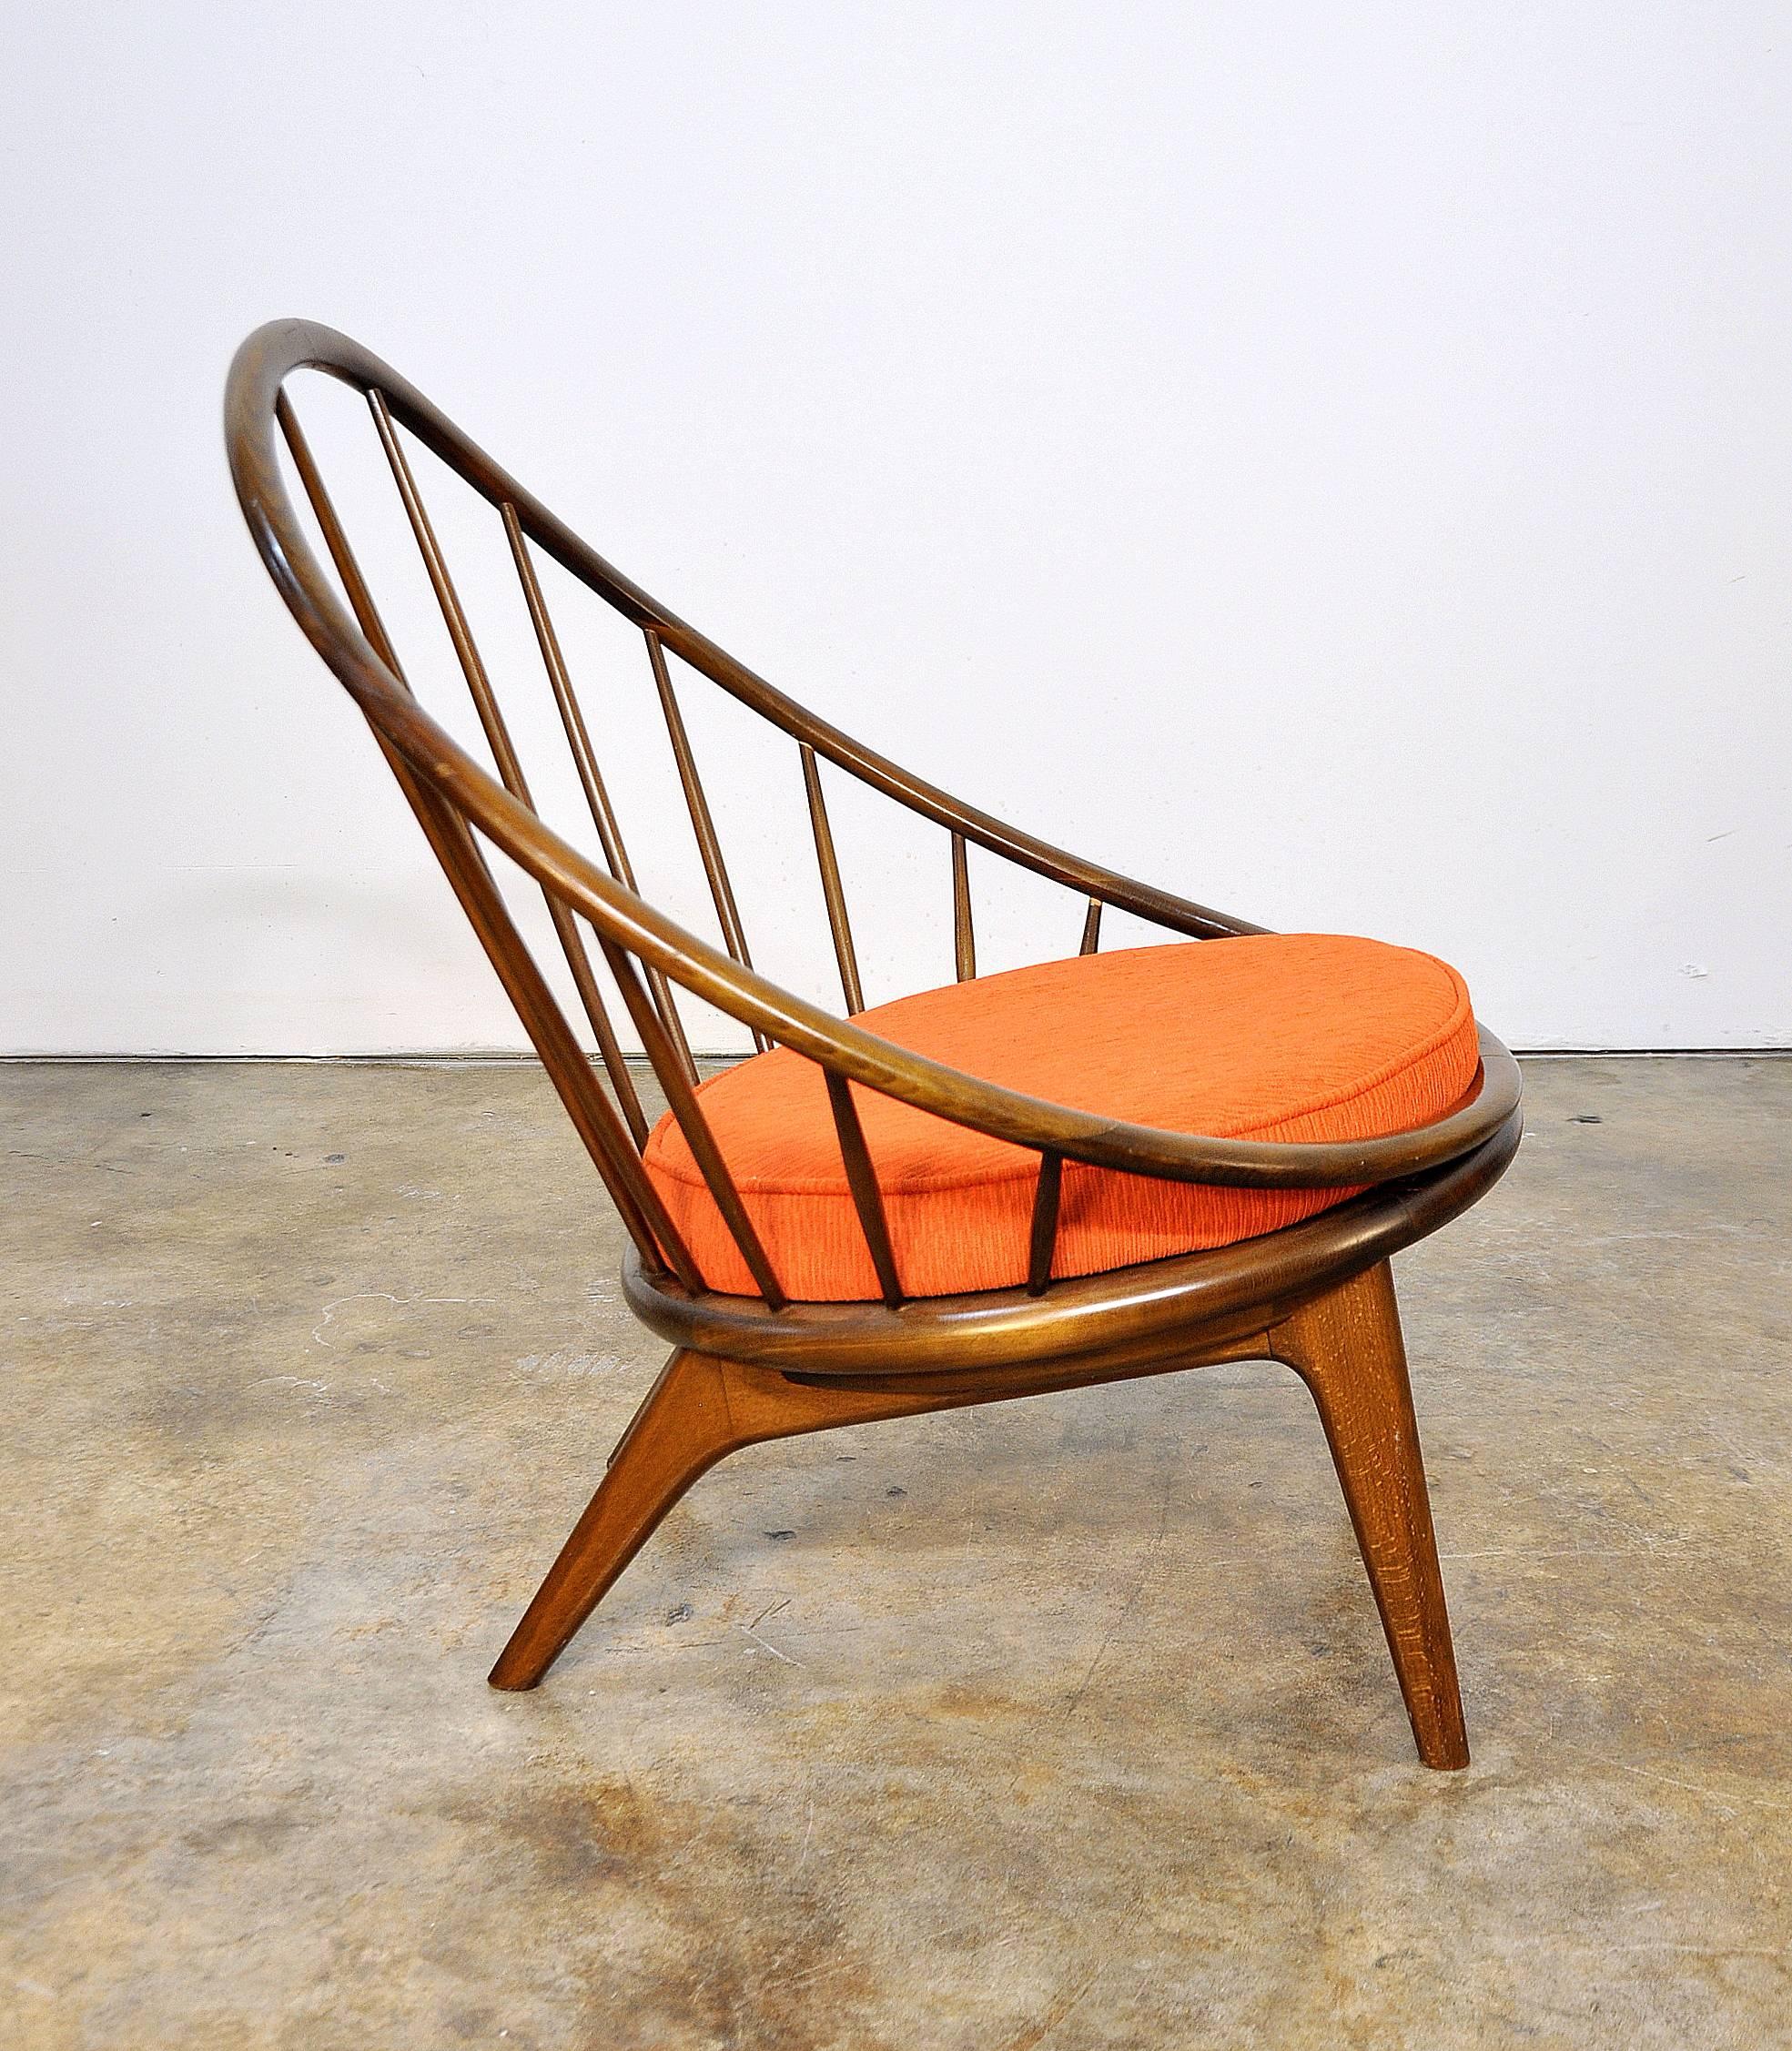 This is a rare and early example of Kofod Larsen's hoop chair, dating from the late 1950s. He later modified the design of the chair by adding batwings on the arms. The redesigned chairs were distributed by Selig in the early 1960s. The chair